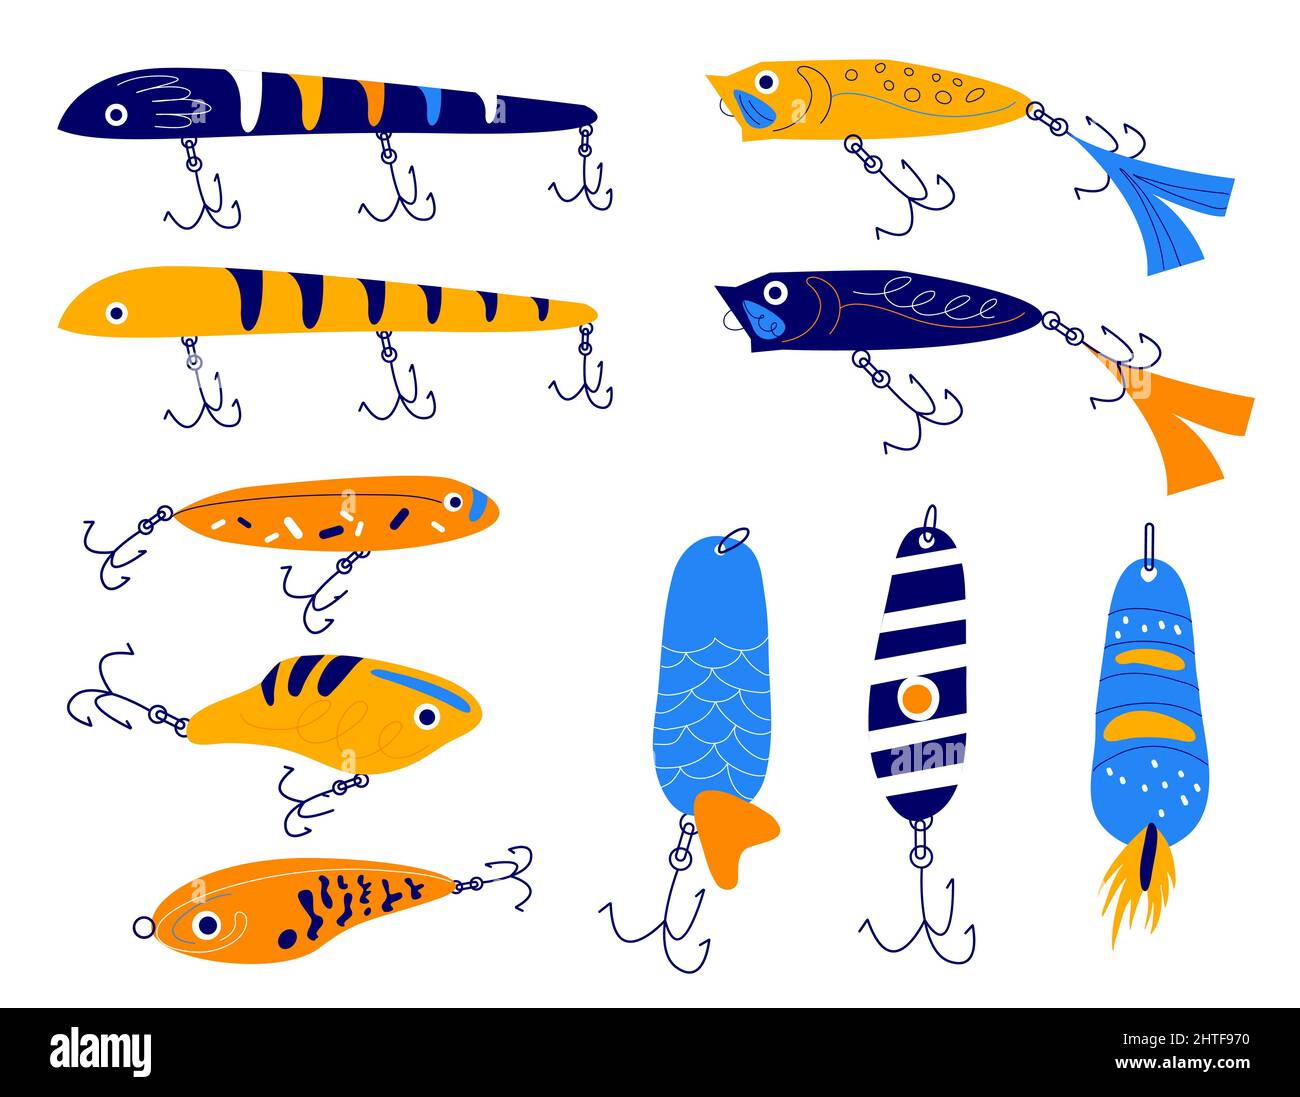 Fishing bait. Different shapes colorful lures with hooks, floating element  outdoor river or lake hobbie, cartoon angling equipment, blue and yellow  Stock Vector Image & Art - Alamy